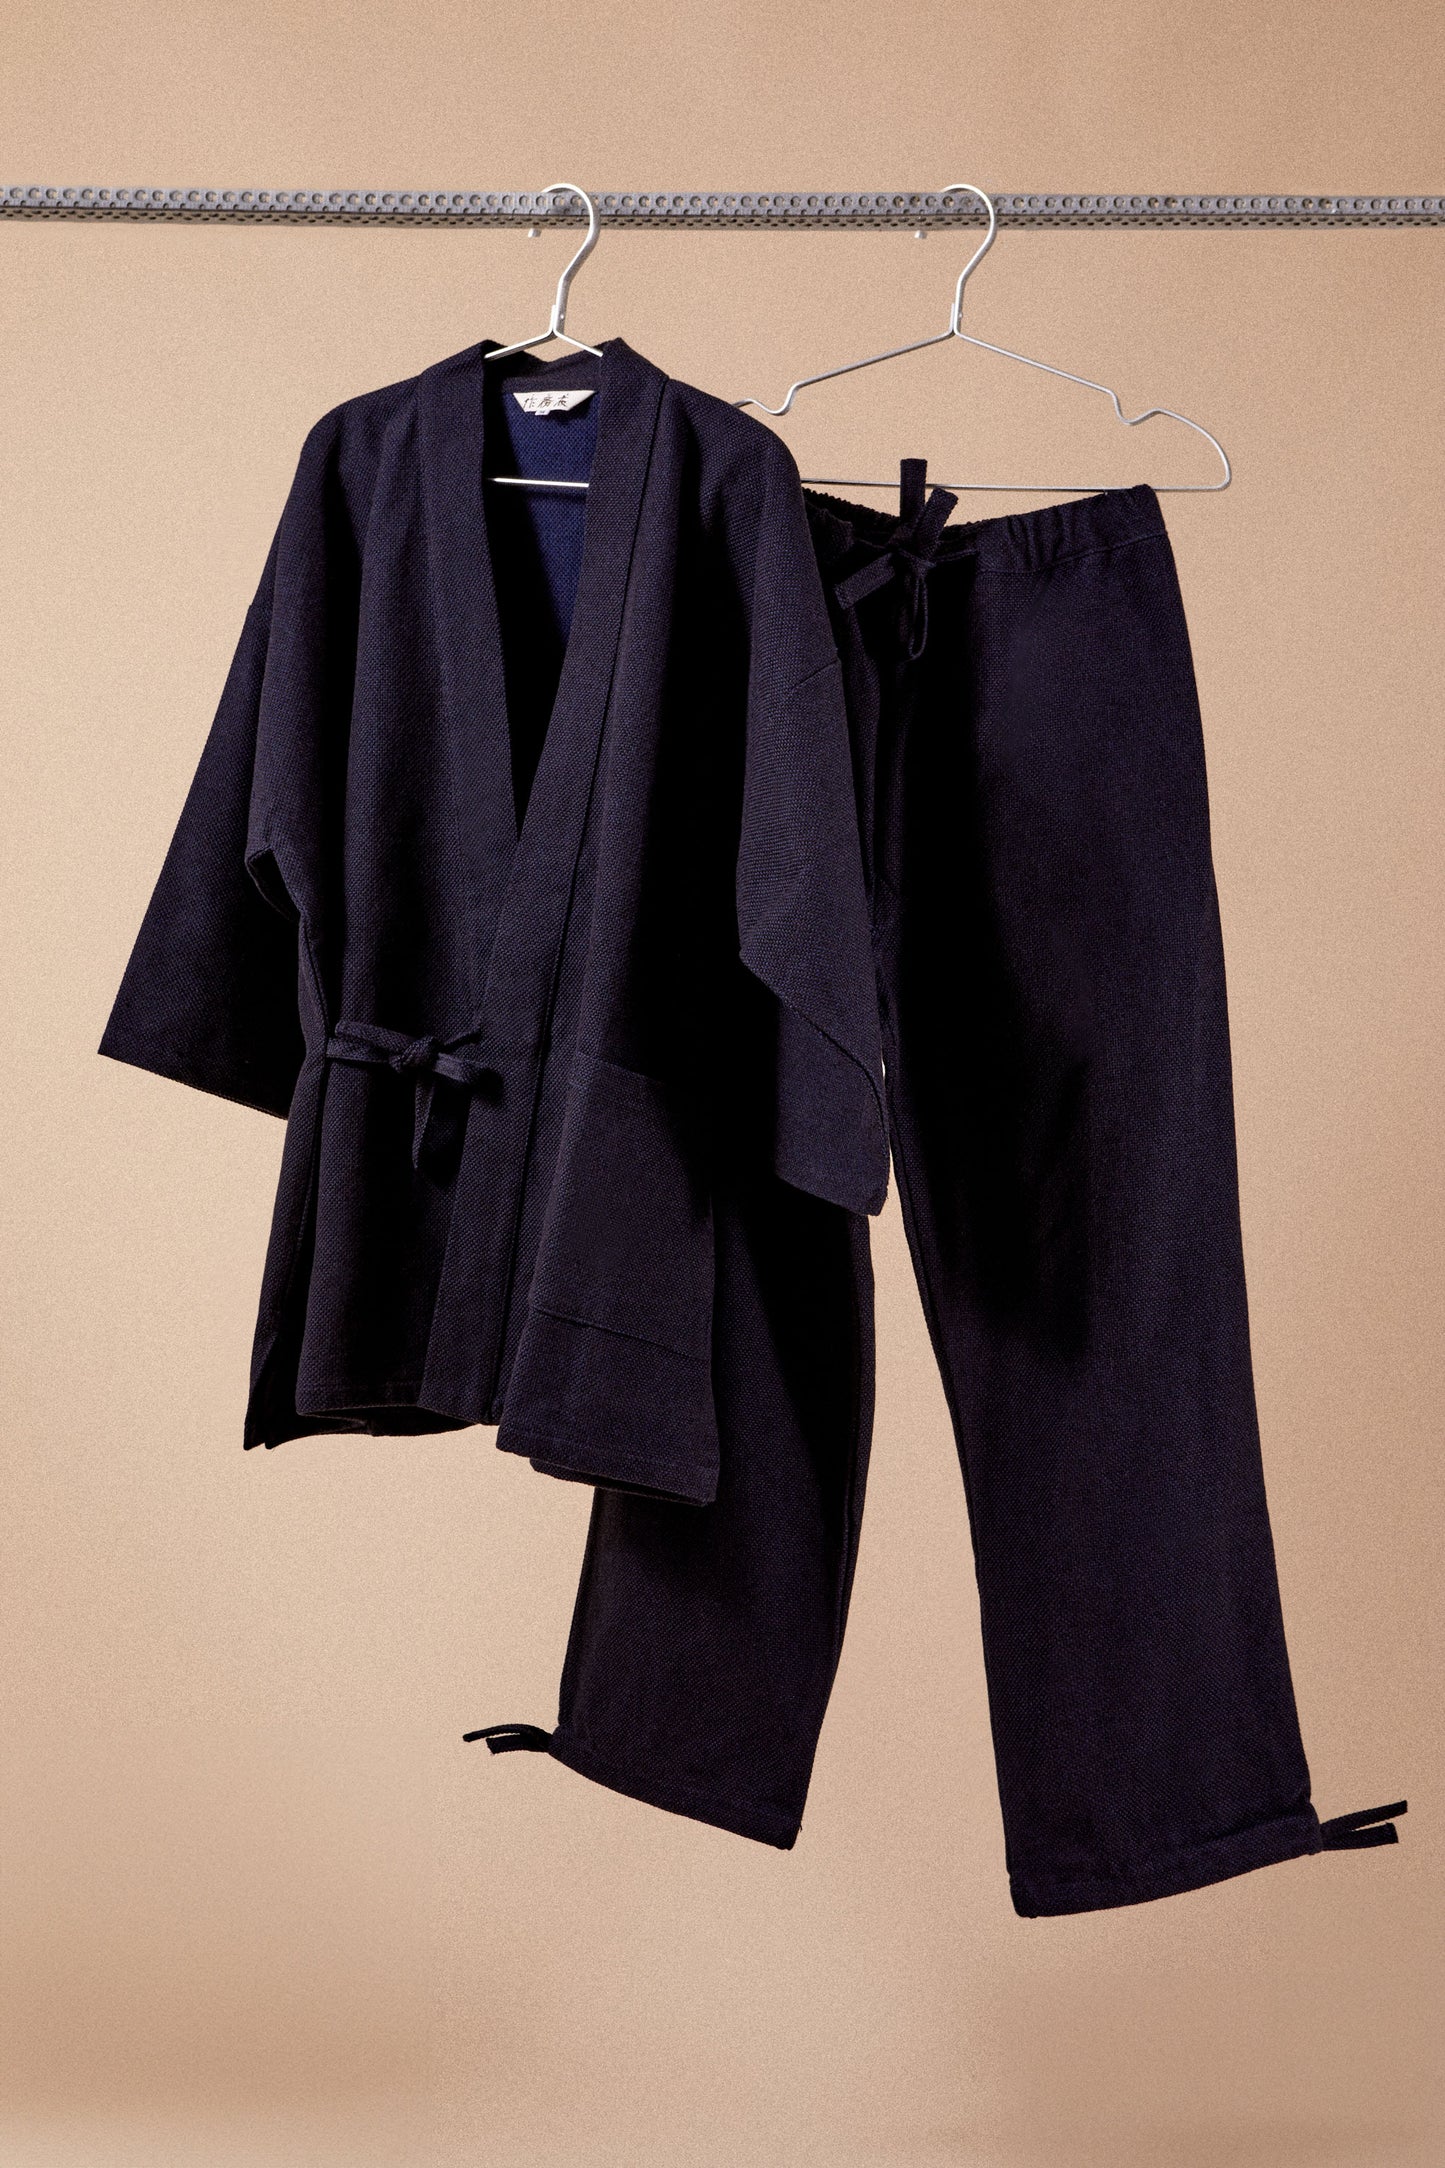 MONK'S OUTFIT - NAVY